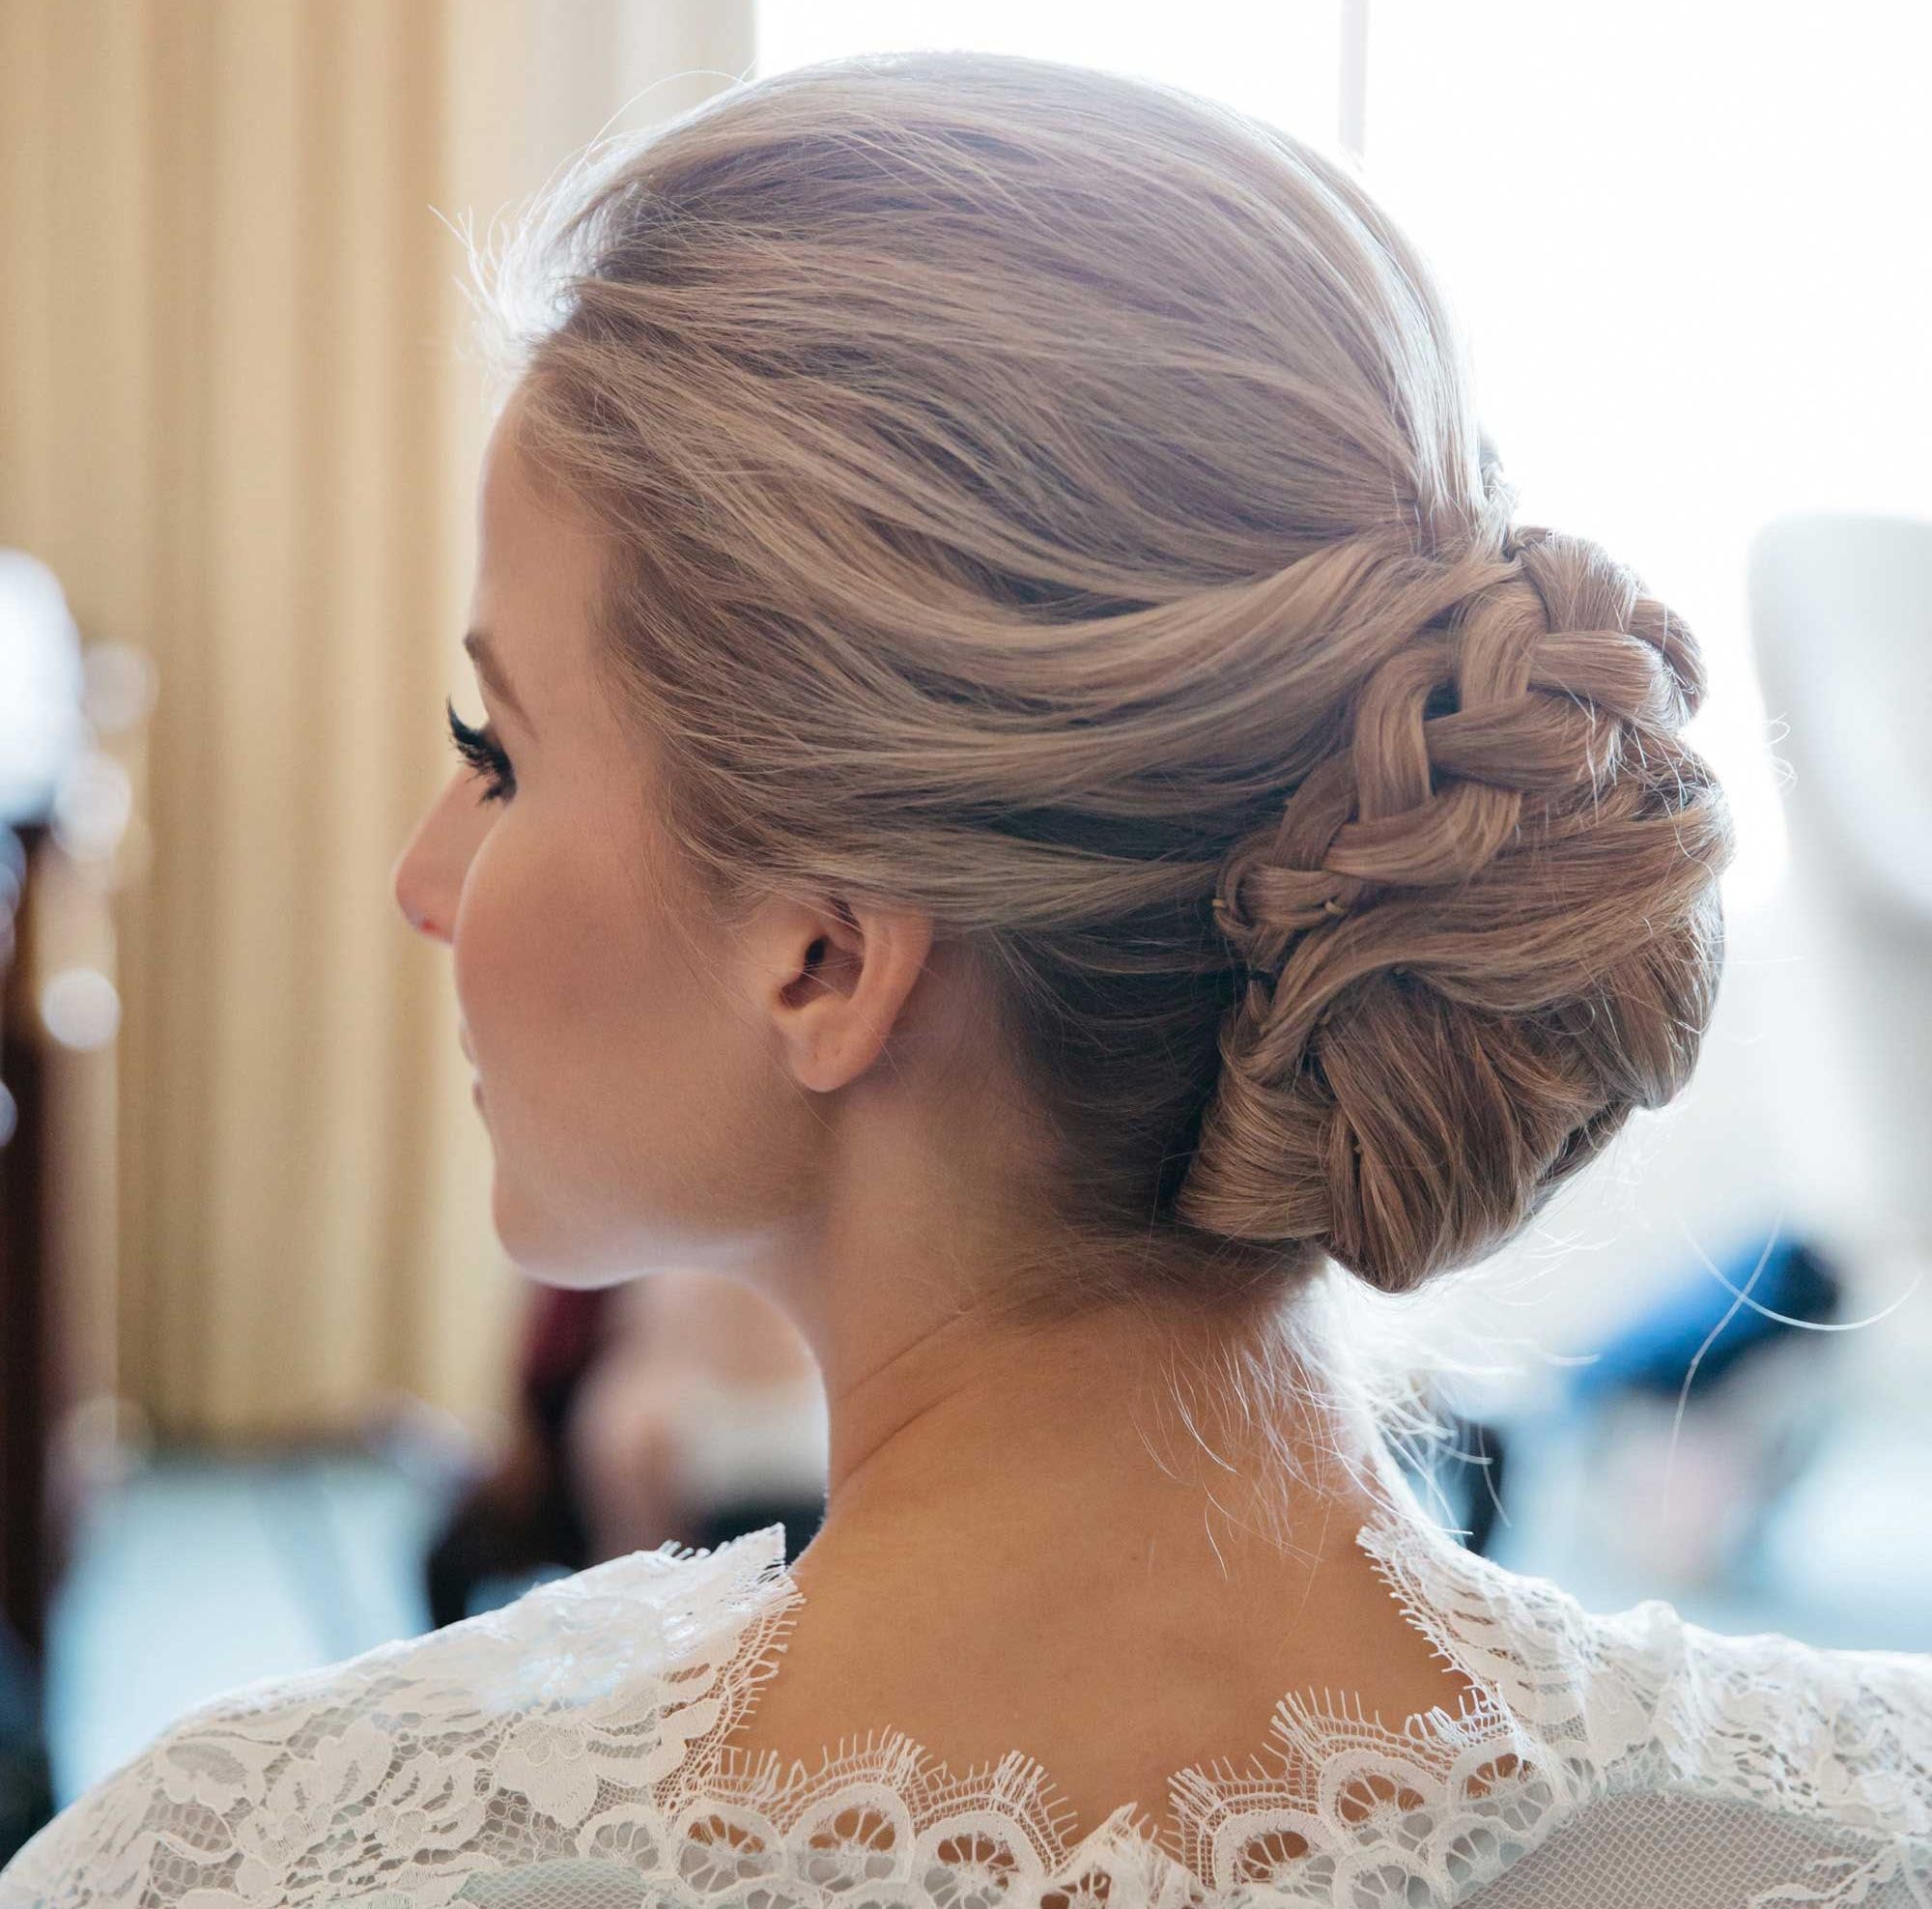 Braided Hairstyles: 5 Ideas For Your Wedding Look – Inside Weddings Throughout Wedding Bun Updo Hairstyles (View 12 of 15)